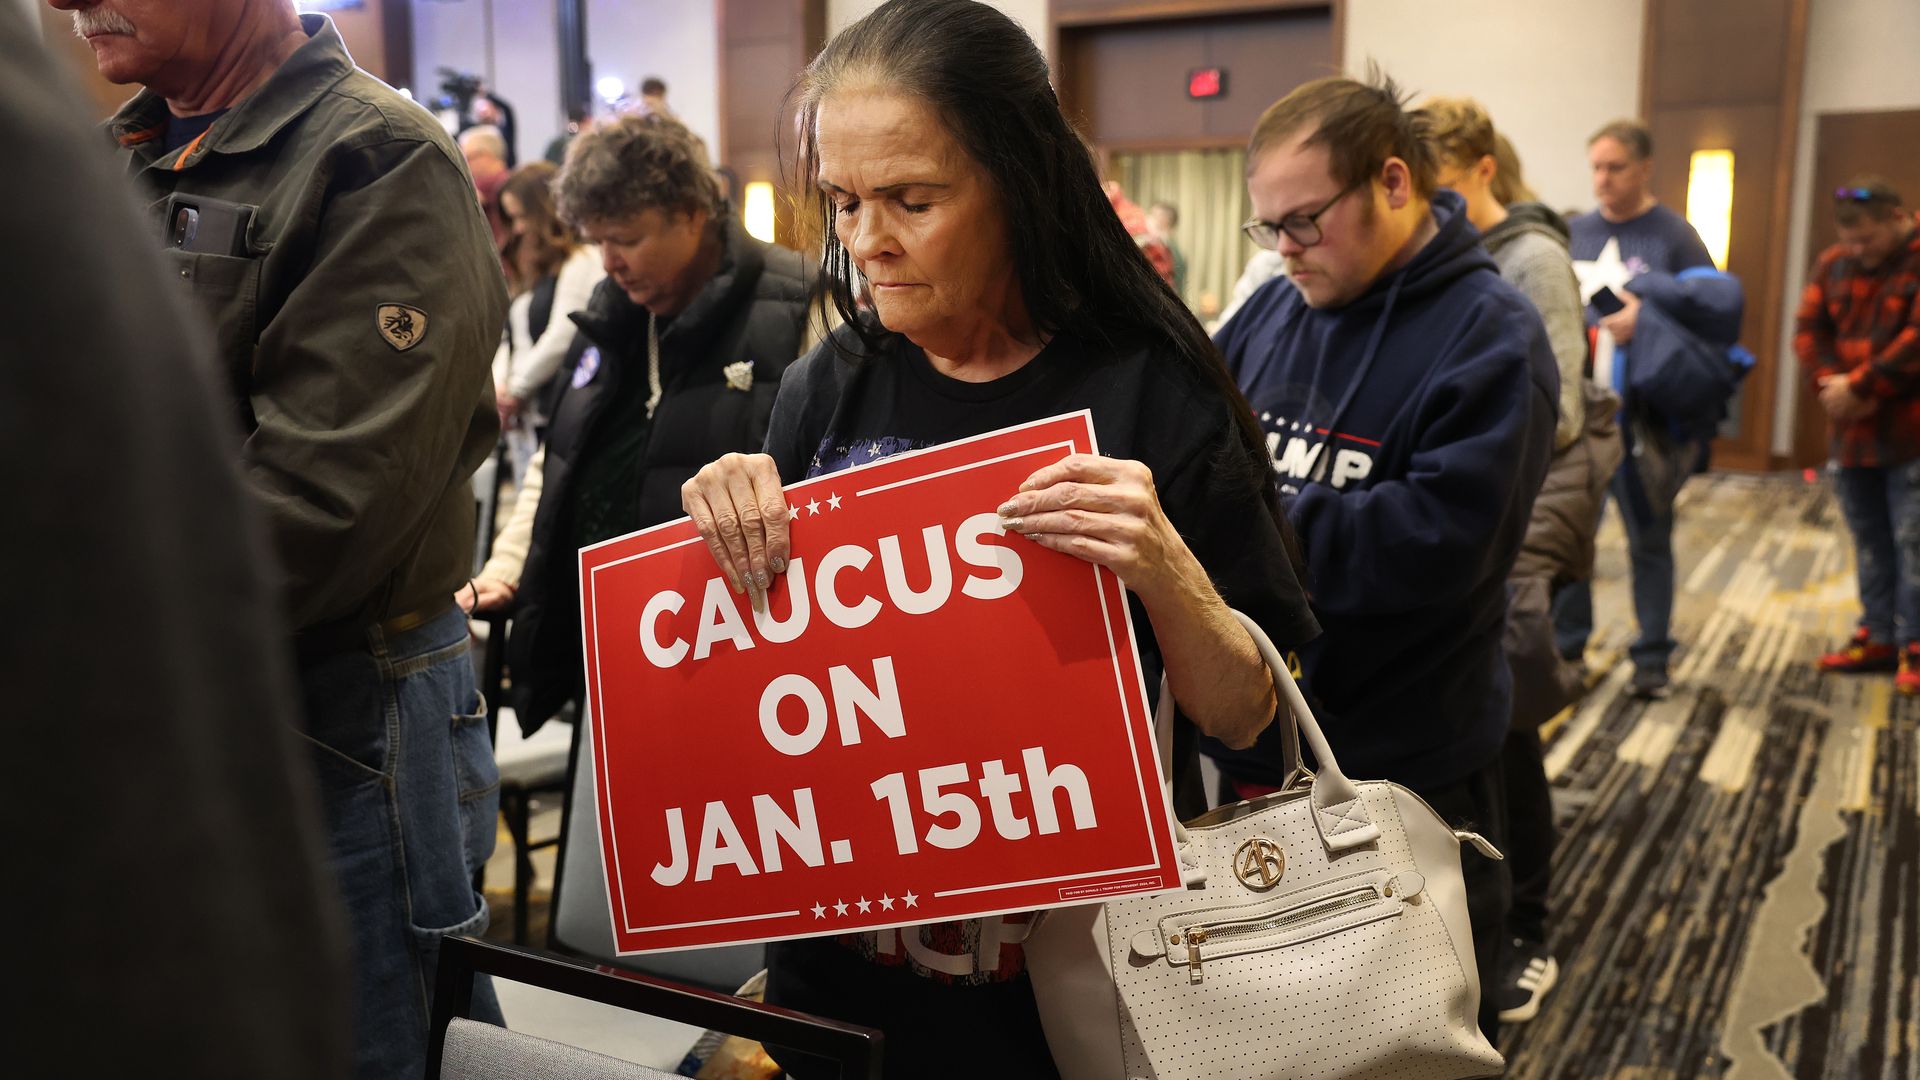 A photo of a woman holding an Iowa caucus sign.